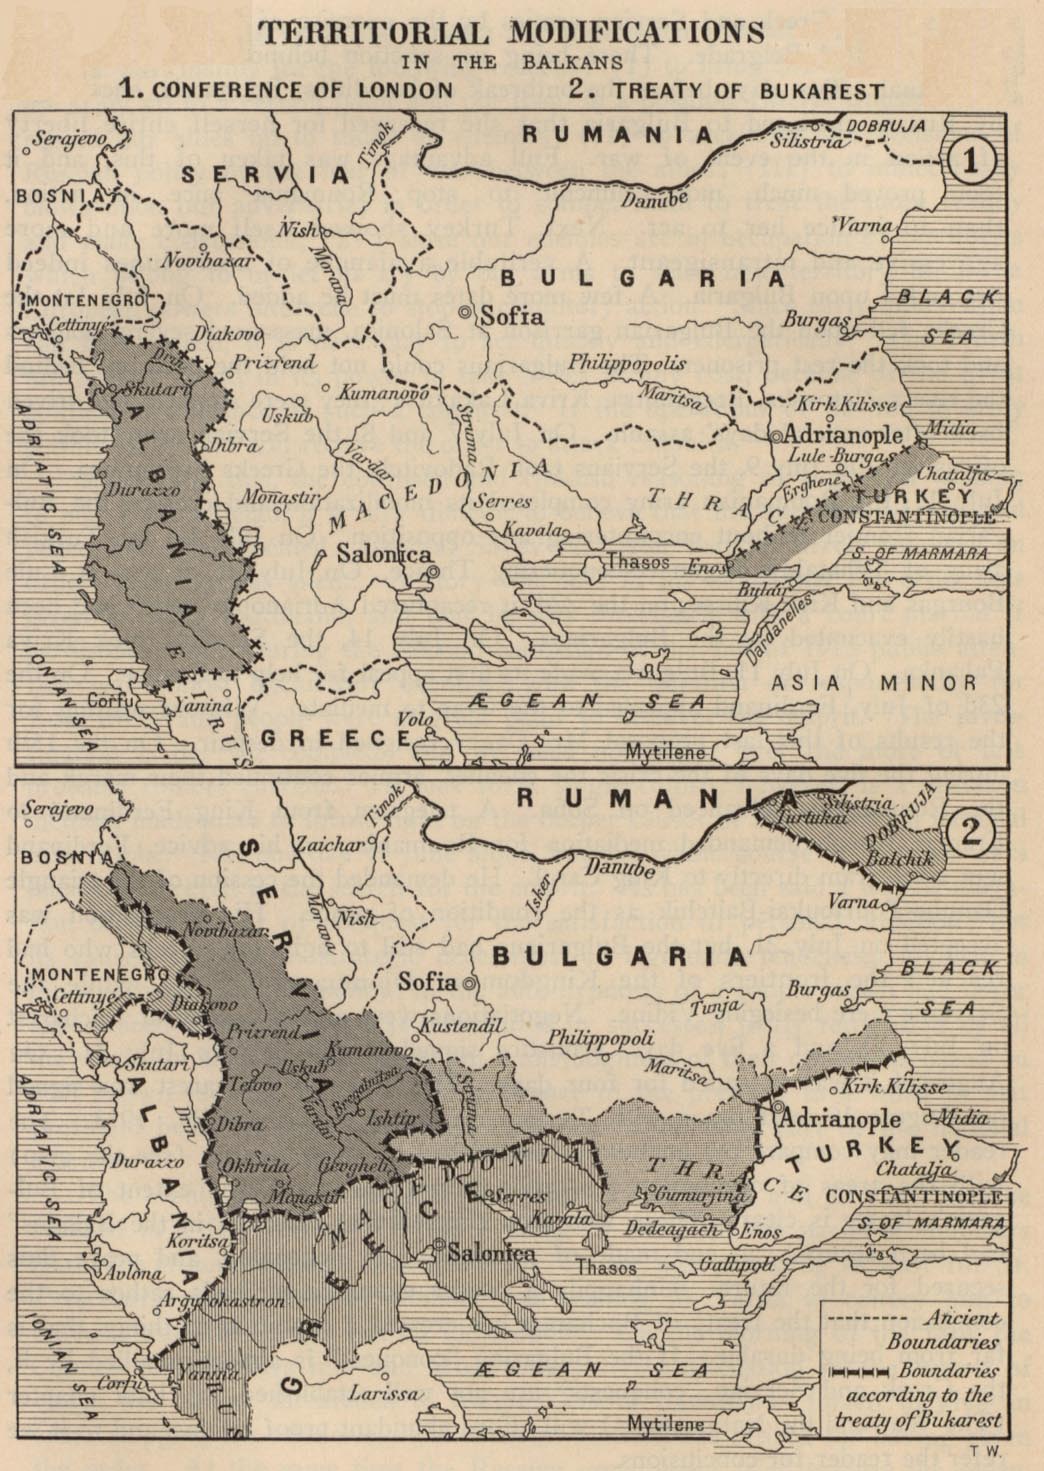 Historical Map of Balkans. Territorial Modifications in the Balkans - Conference of London [May 1913] and Treaty of Bukarest [August 1913] (281K) Map from "Report of the International Commission To Inquire into the Causes and Conduct of the Balkan Wars" 1914. "The Treaty of London (30 May 1913) ceded to the Balkan allies all territories 'west of a line drawn from Enos on the Aegean Sea to Midia on the Black Sea, with the exception of Albania. It was not only a defeat of the military forces of the Turkish empire, but a defeat of the Austrian dream of Drang nach Osten. ...Austria-Hungary and Italy, rather than see Albania partitioned between Slav states on the north and Greece on the south, had succeeded in blocking Serbian access to the Adriatic by proposing the creation of an autonomous Albania." --quote from: Great Britain. Naval Intelligence Division, Geographical Handbook Series: Jugoslavia, Volume II, 1944, p. 114. 